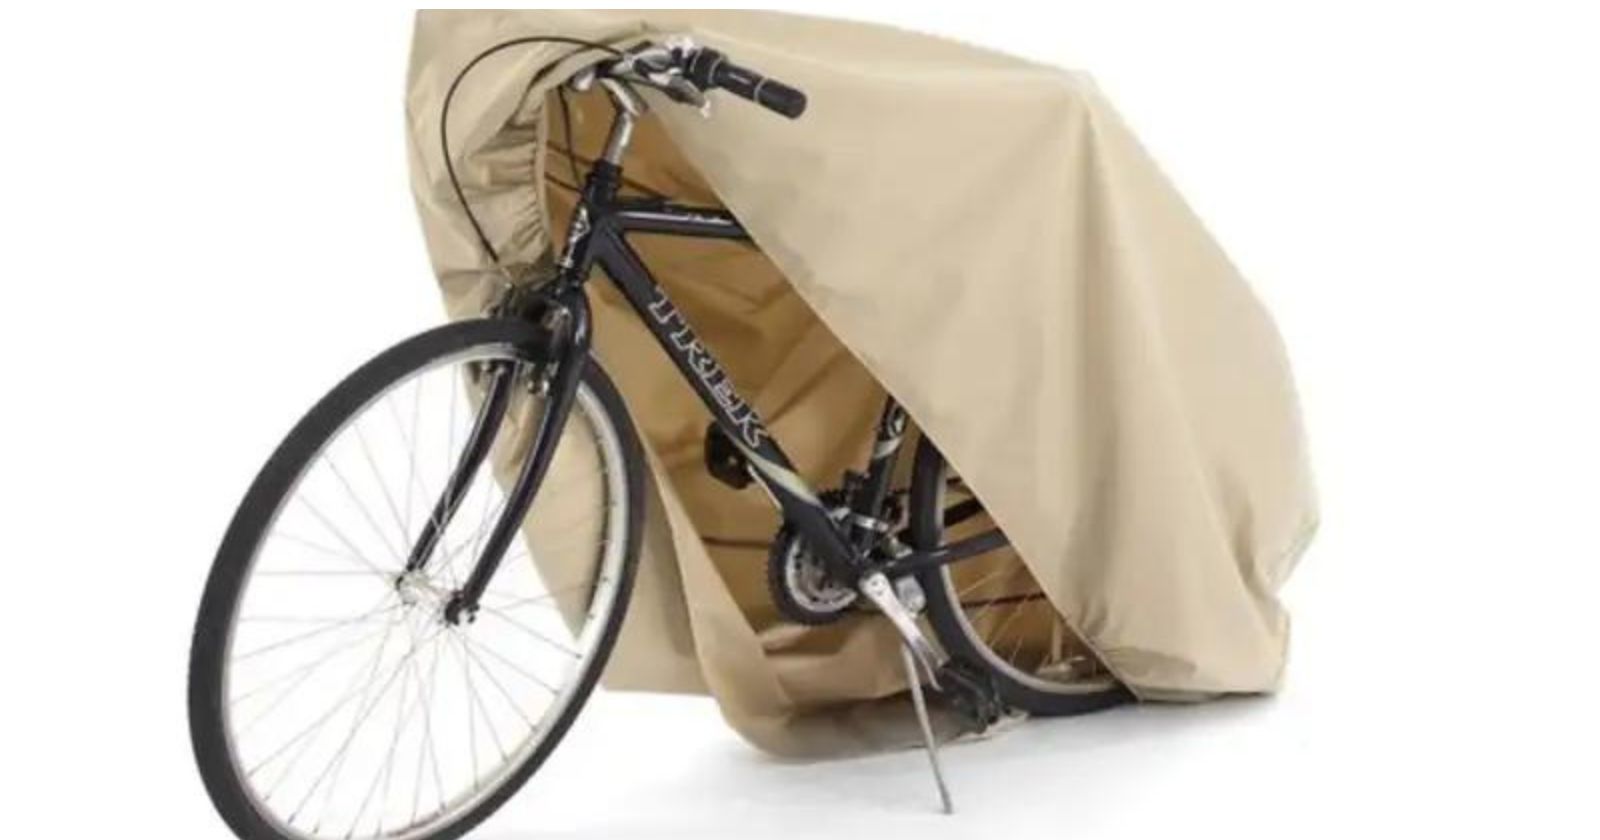 Best Bicycle Covers For Seniors